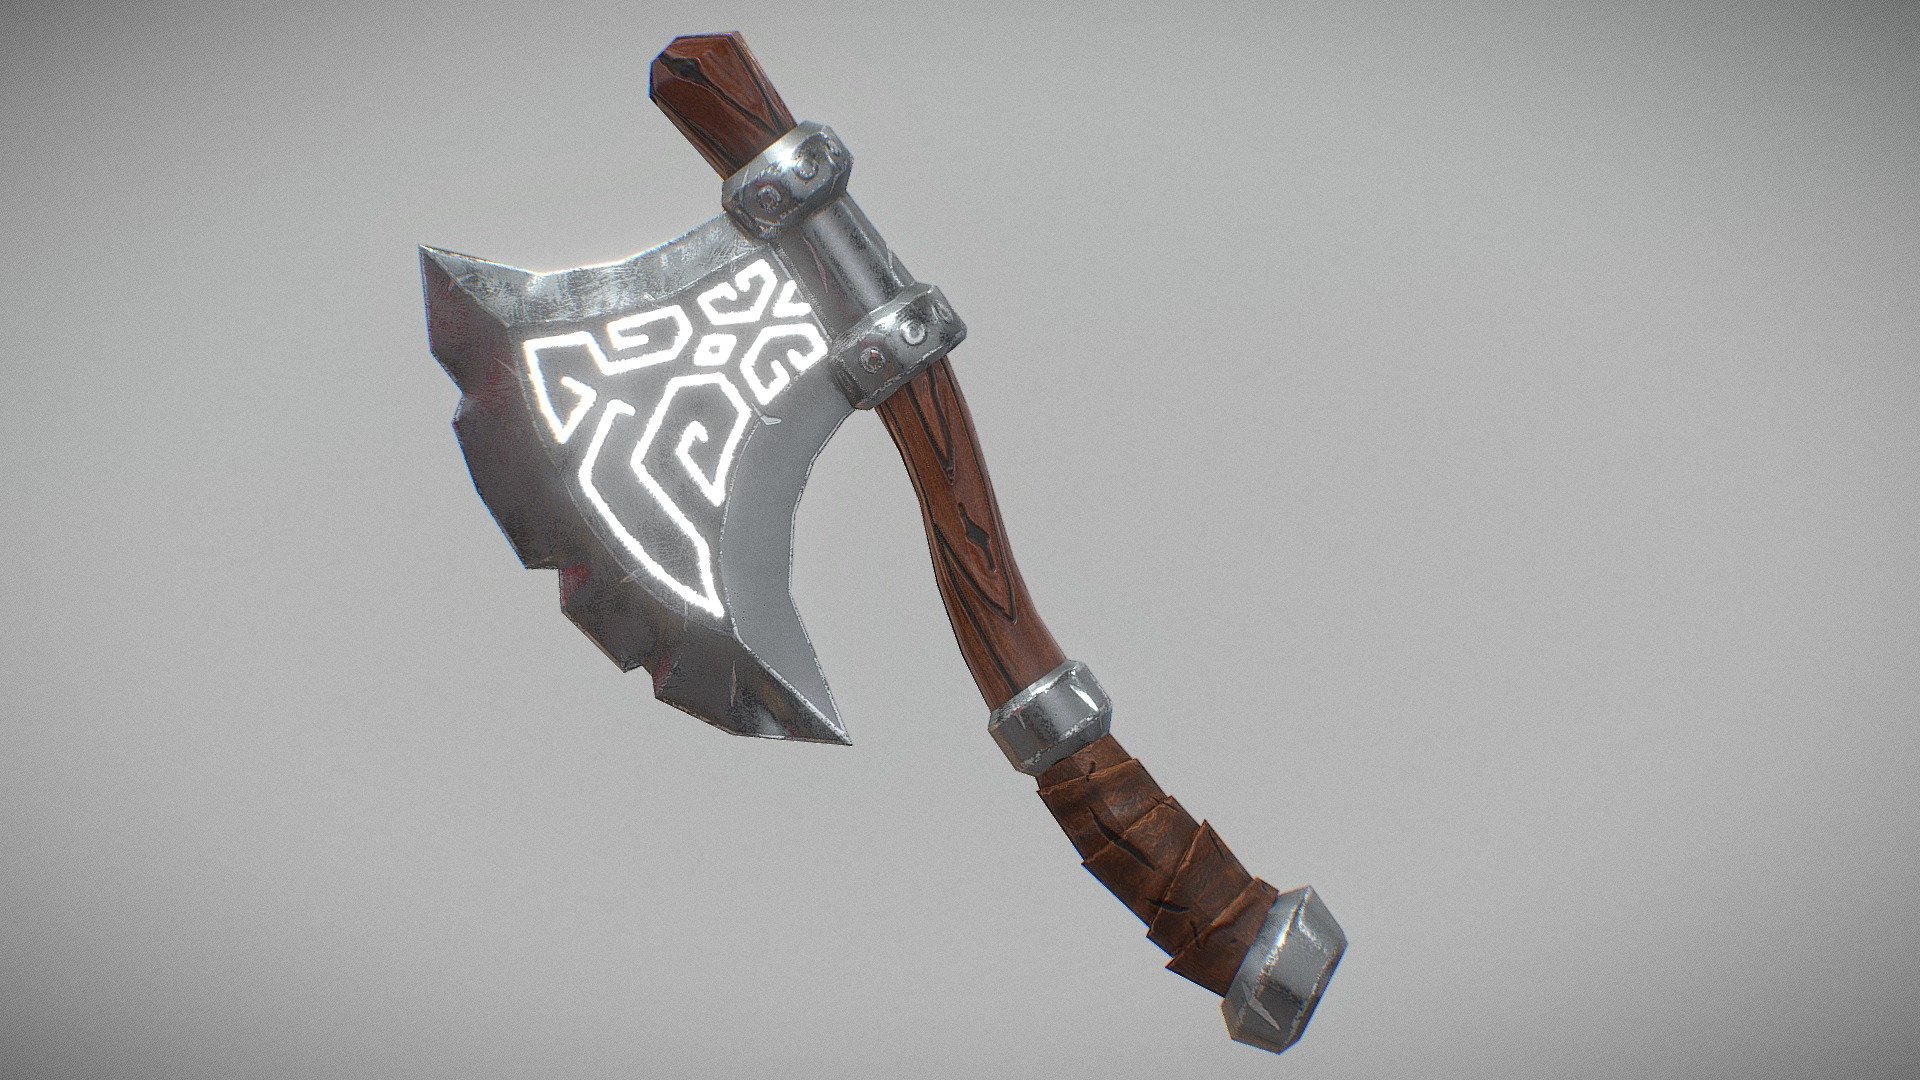 This stylized axe is a game-ready asset modeled in Blender and textured in Substance Painter.

Comissions are open 3d model